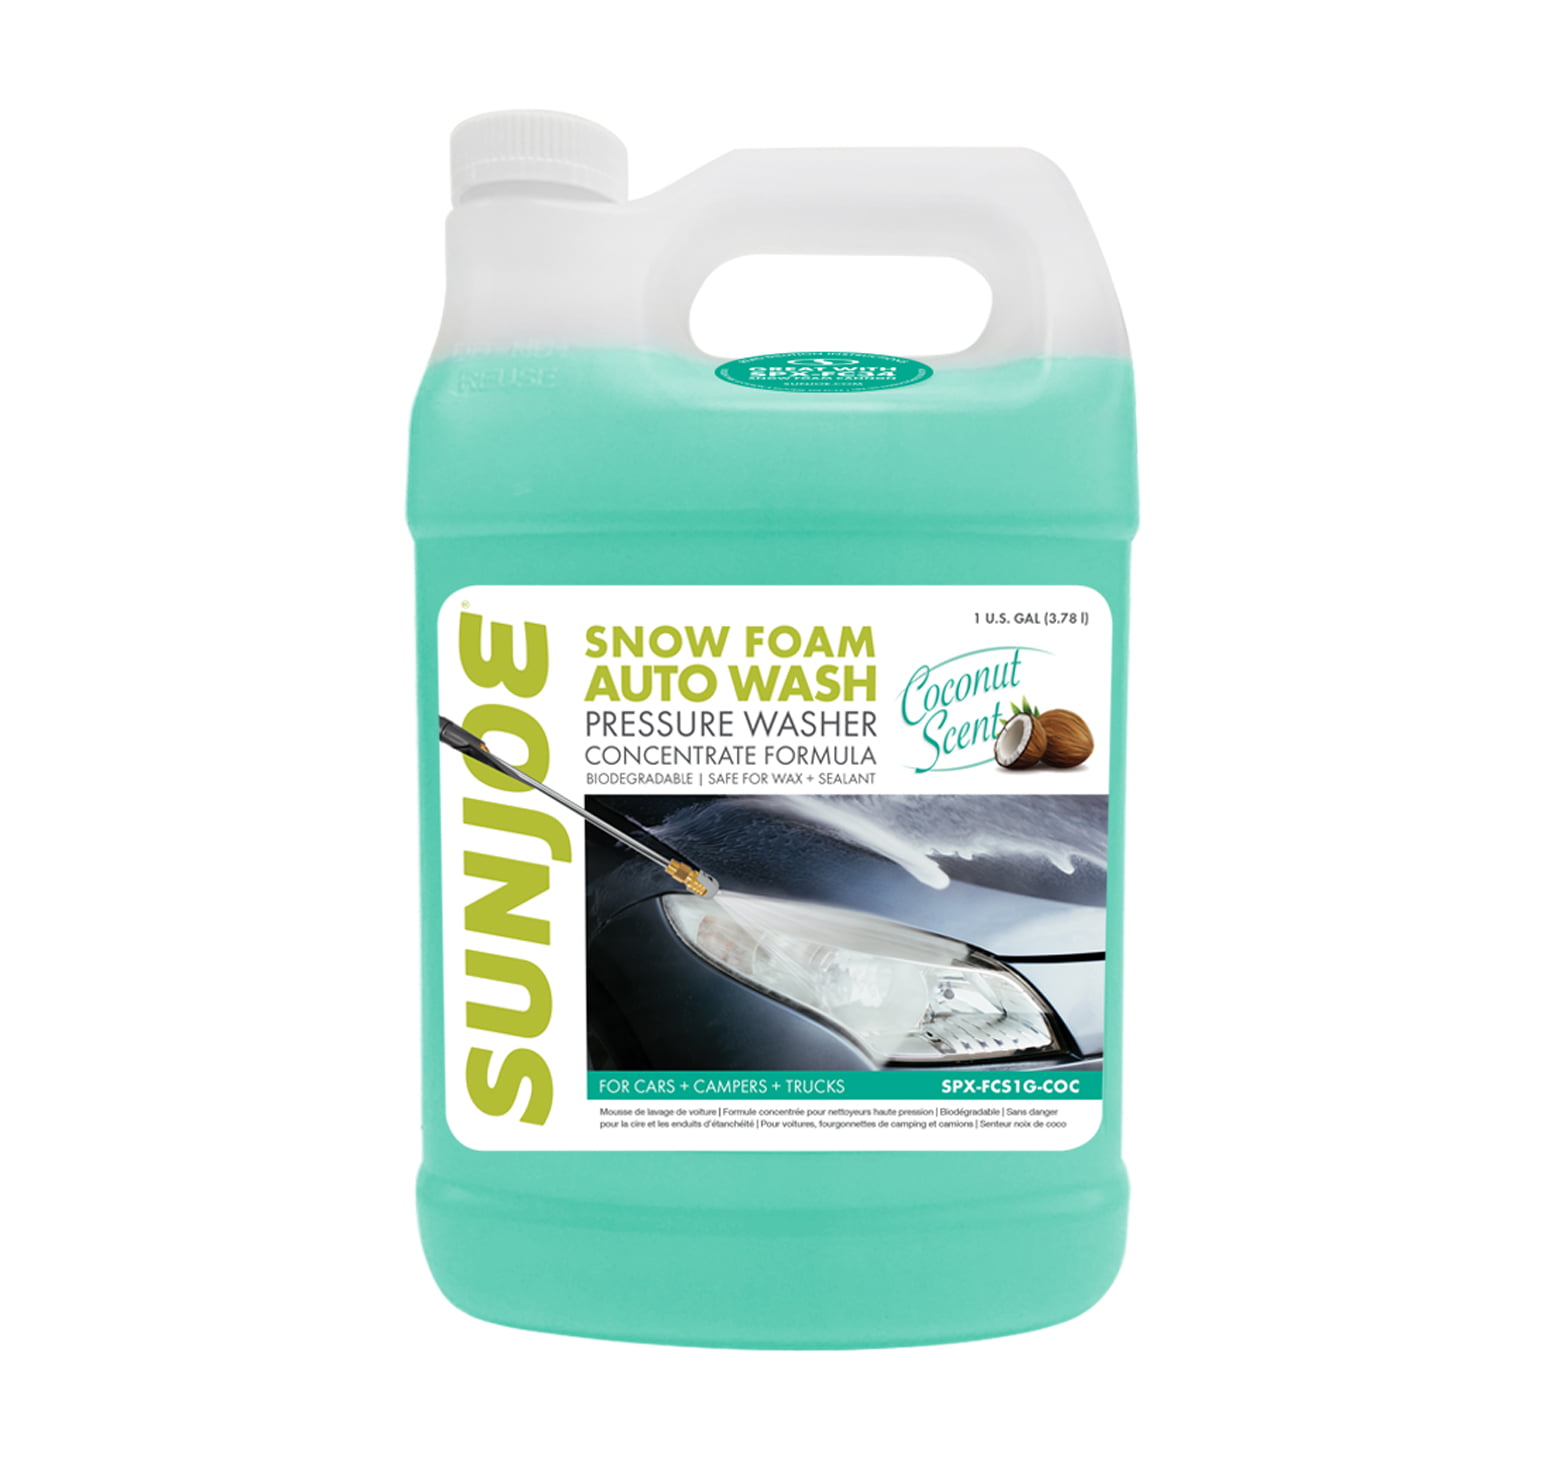 The Best Product For An Amazing Snow Foam Car Wash